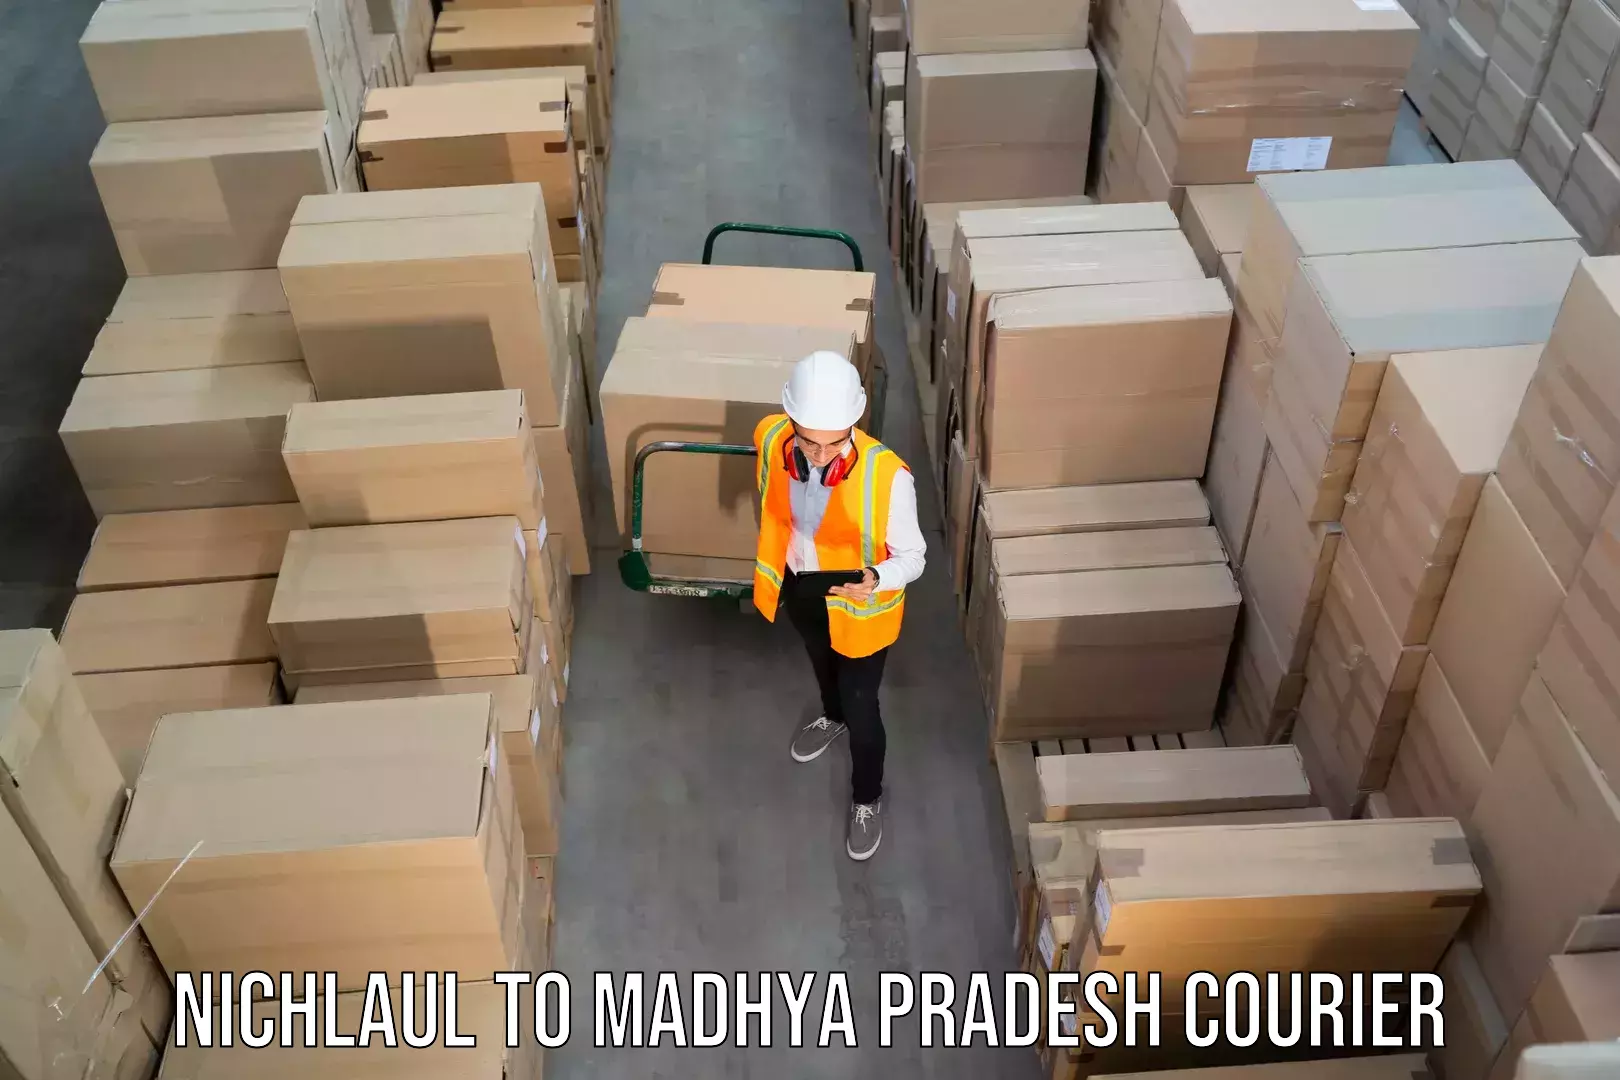 24/7 shipping services in Nichlaul to Narsinghpur